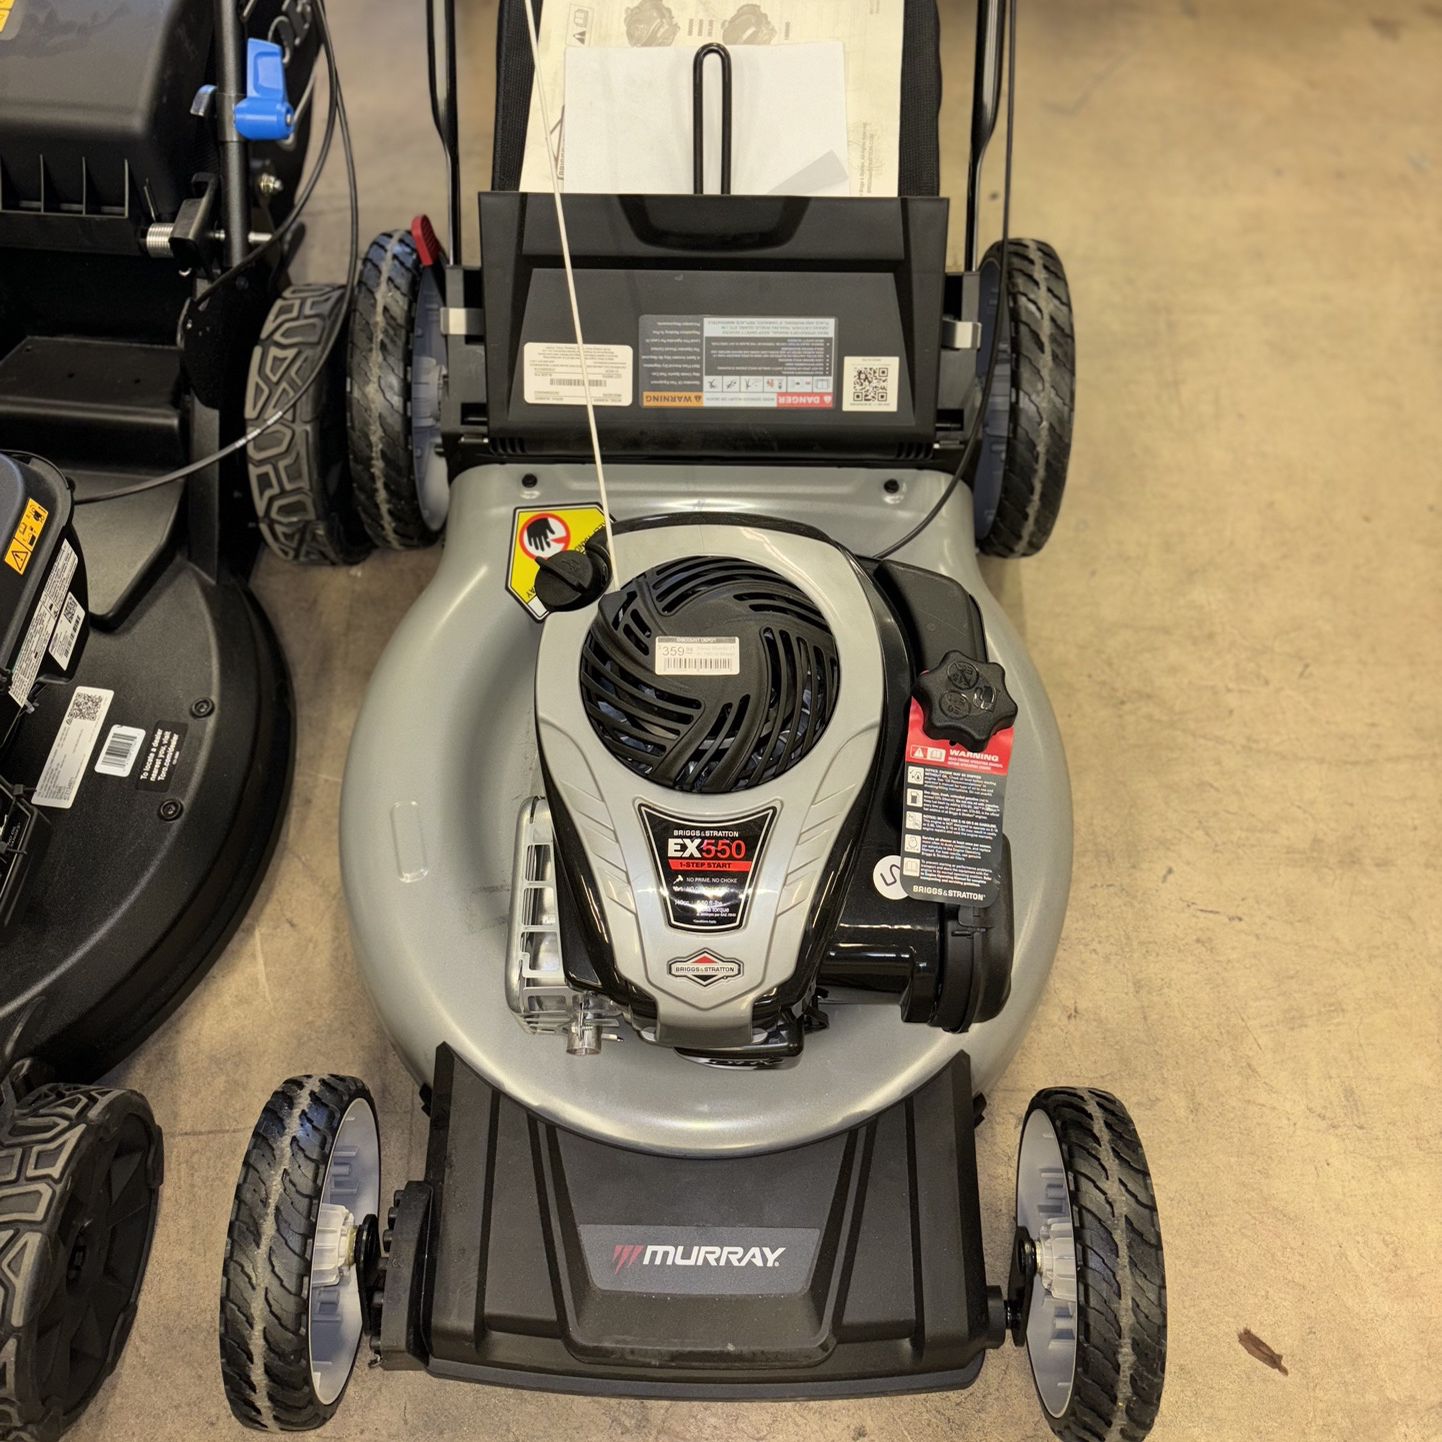 Murray 21” Briggs And Stratton Lawn Mower 